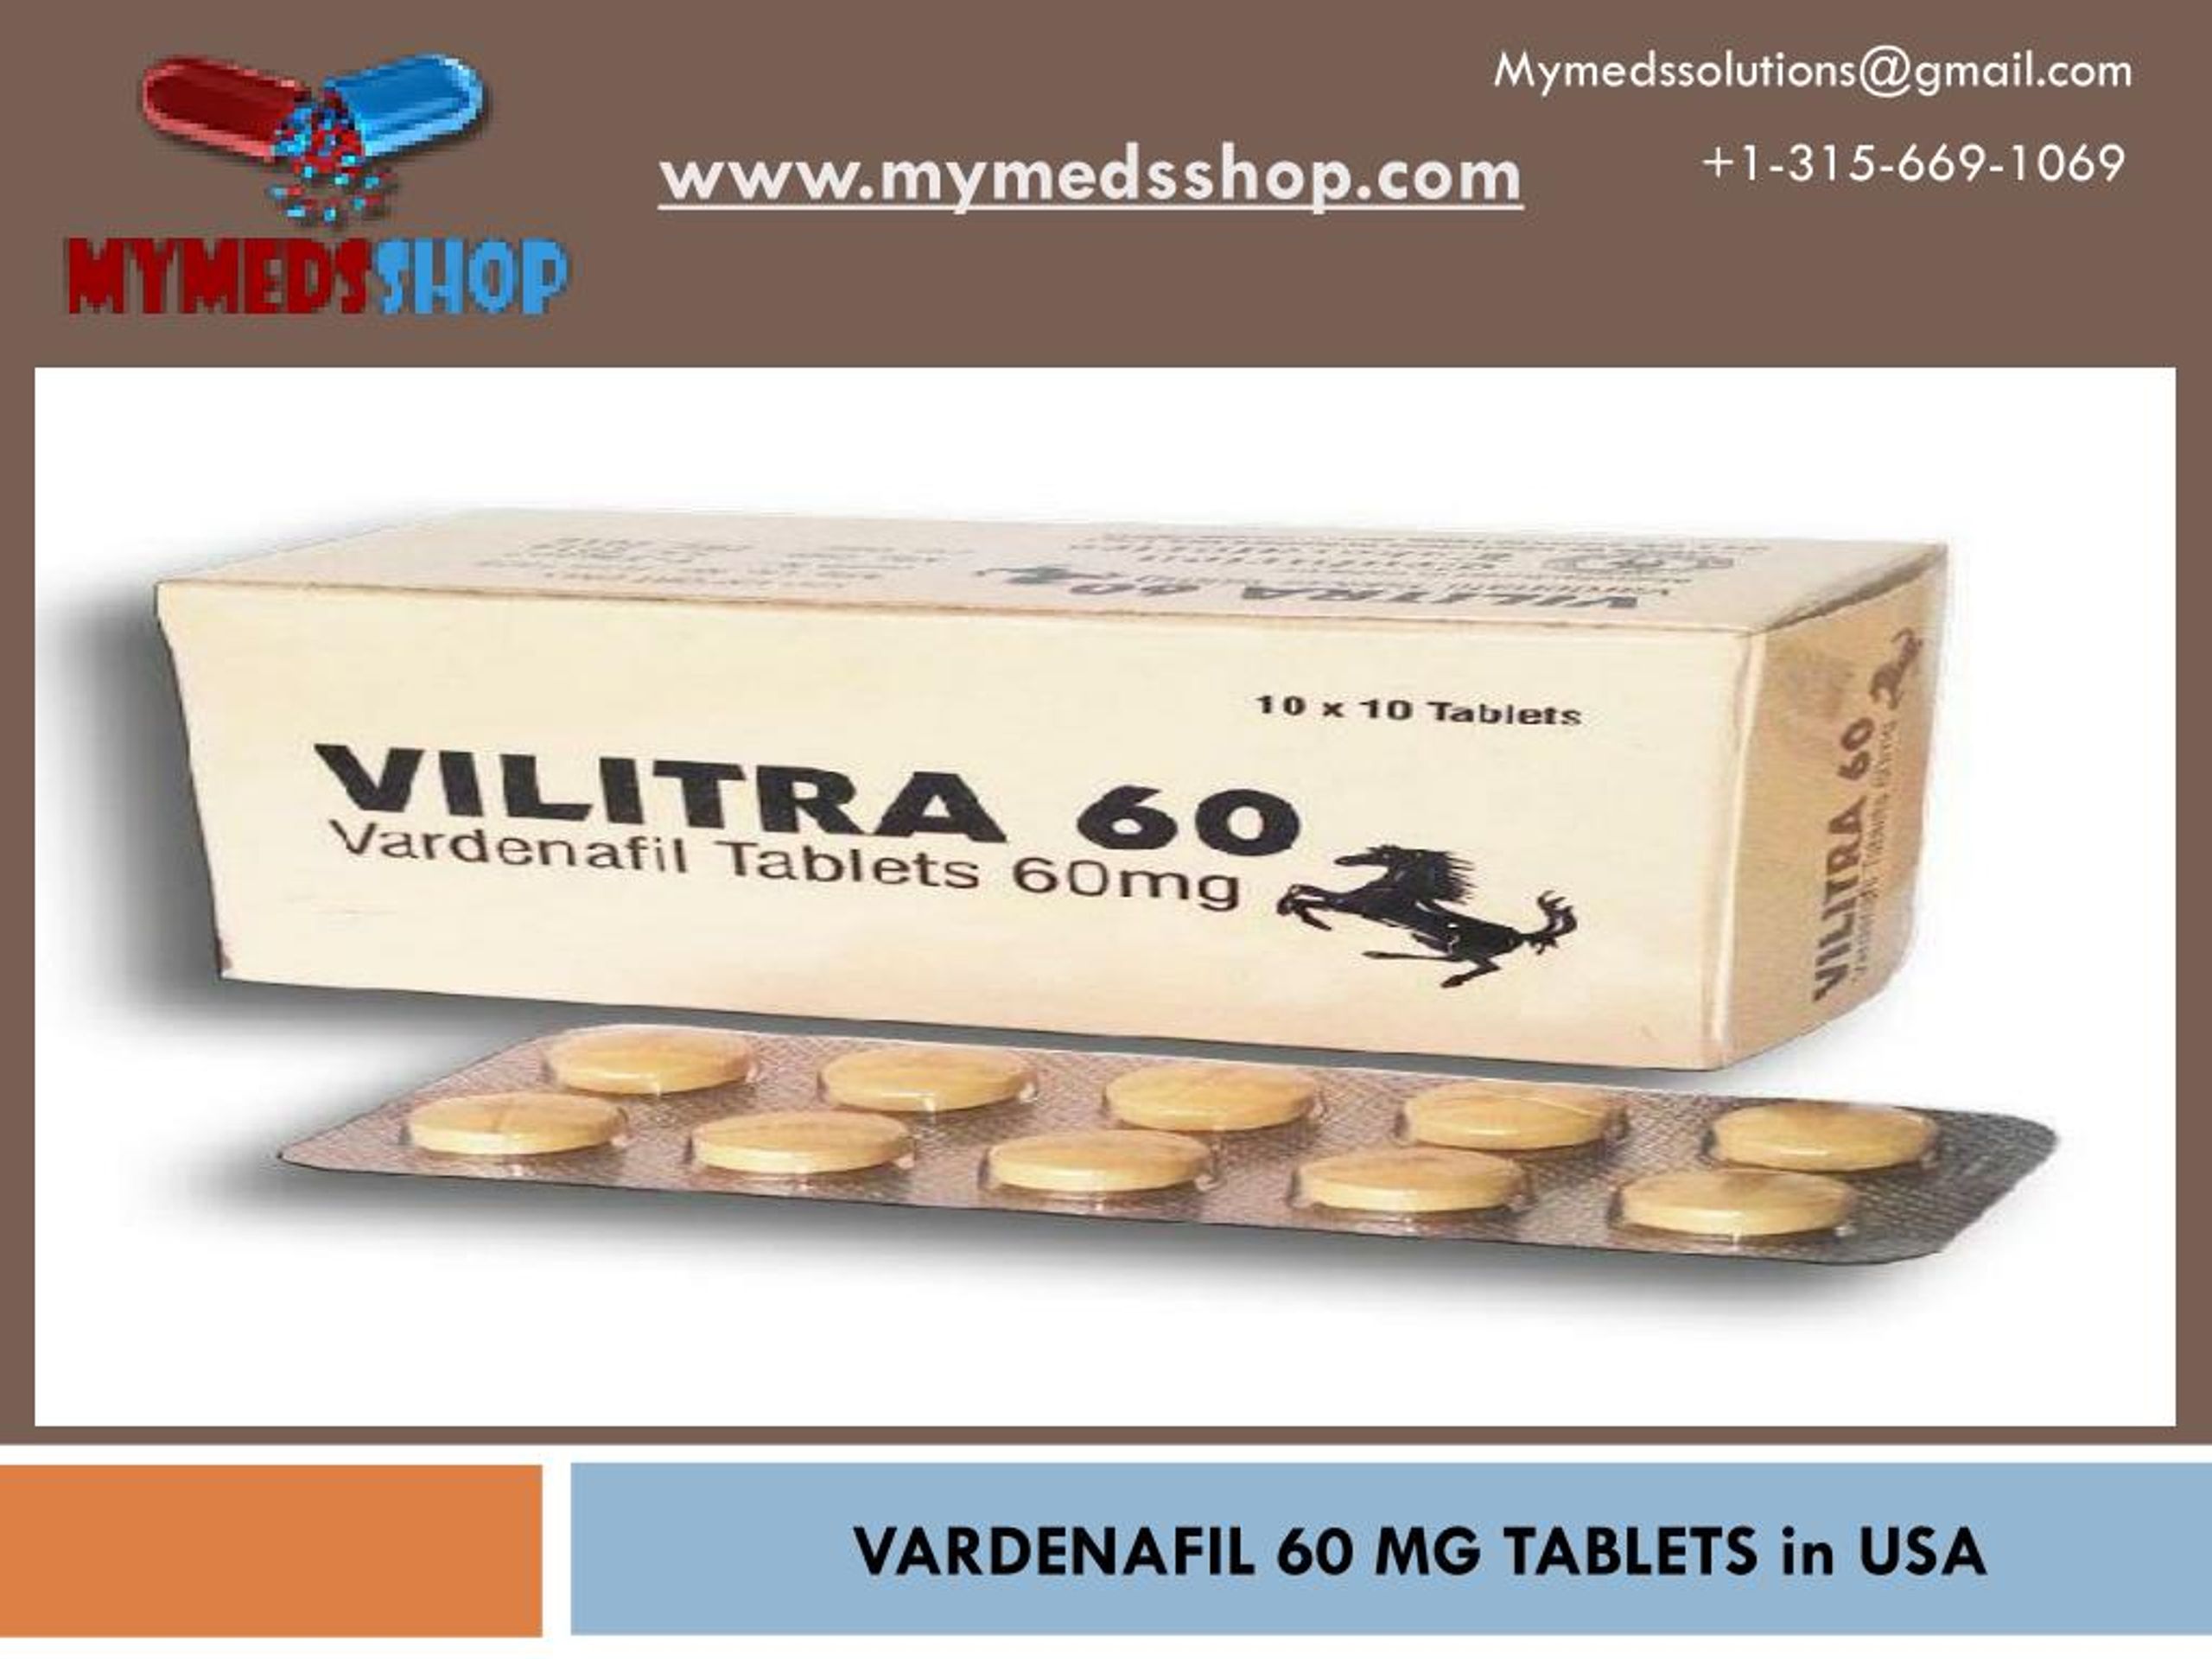 Ivermectin tablets for sale online